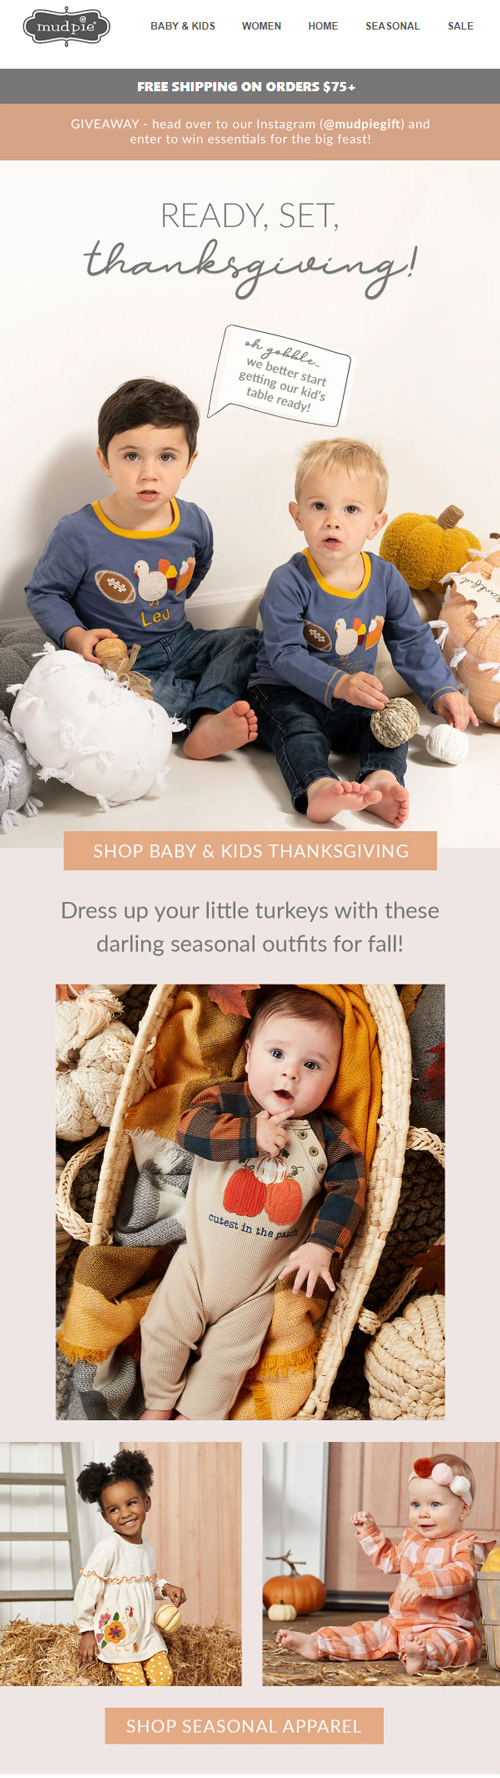 Thanksgiving email from mud-pie